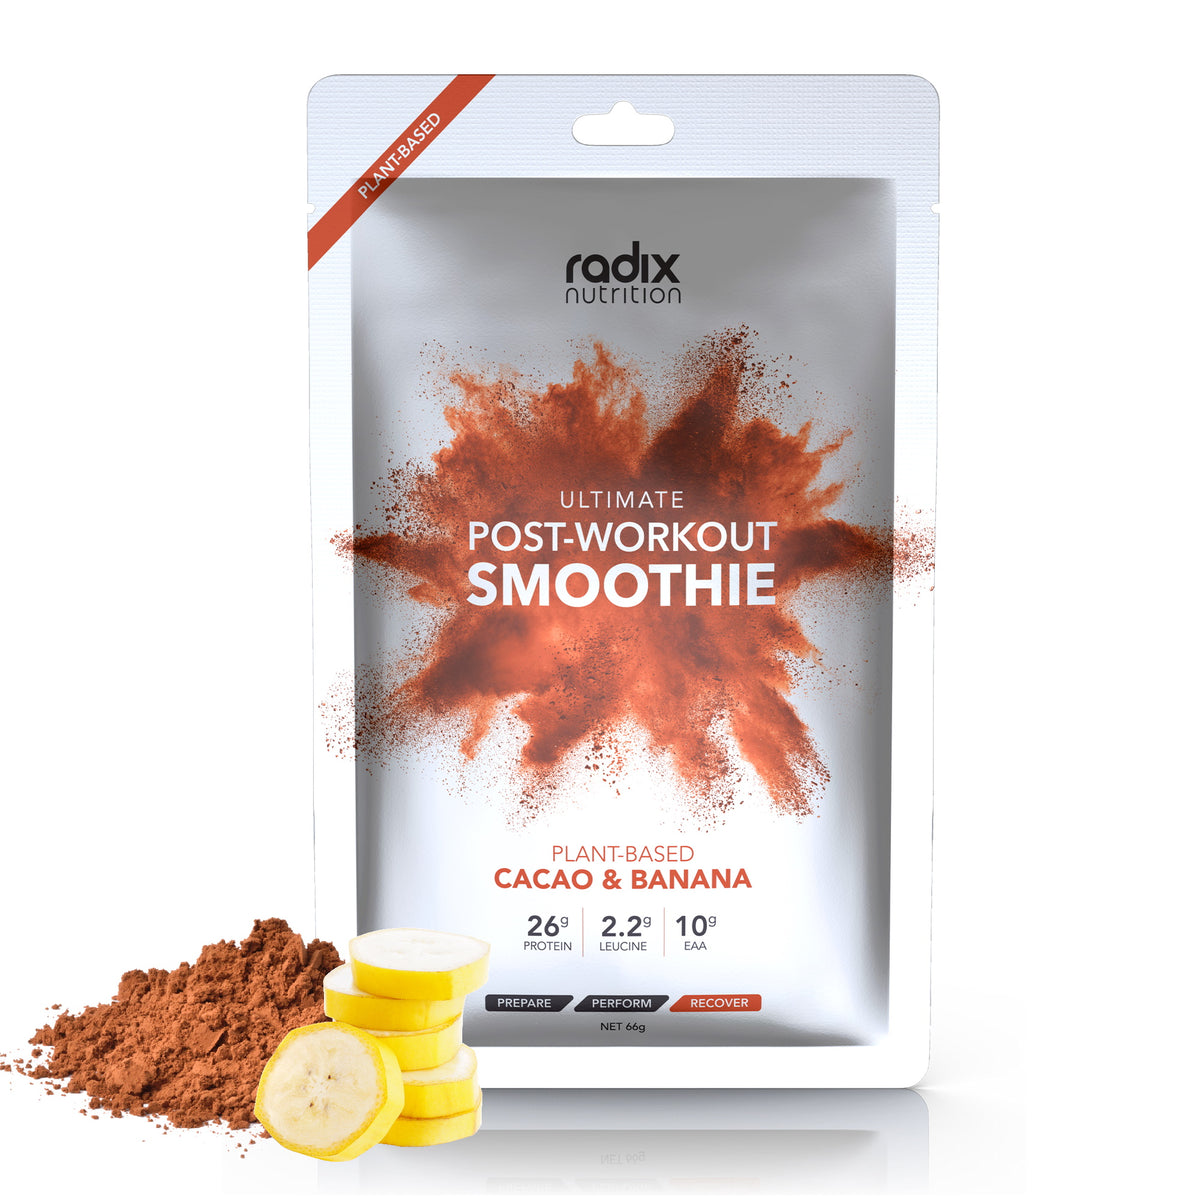 Radix Ultimate Post-Workout Plant-Based Smoothie - Cacao and Banana